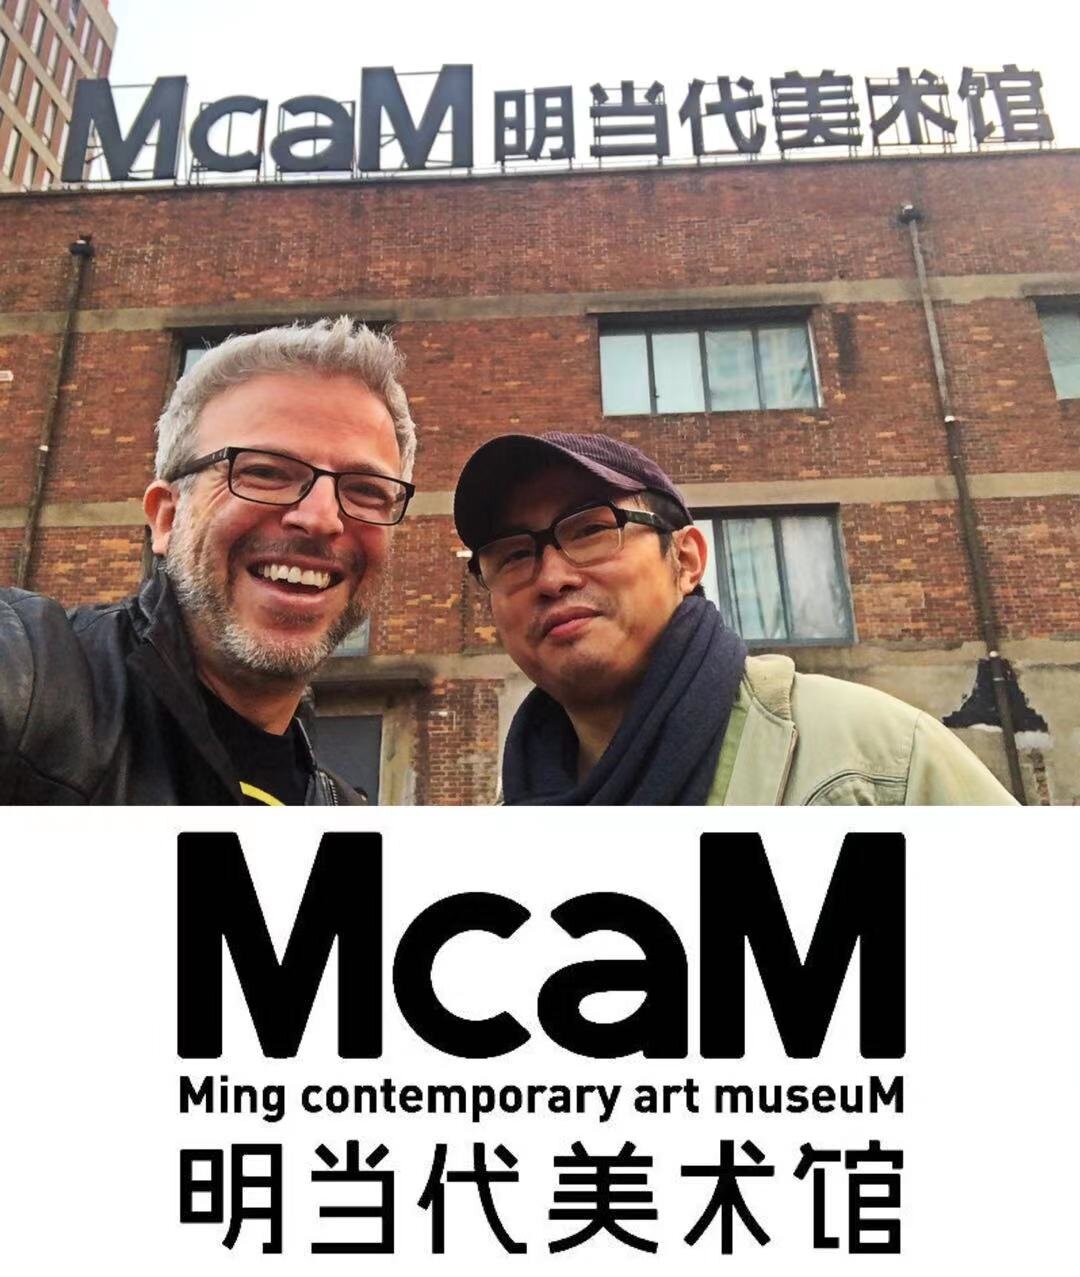  Zhang Yuan: His place of work, the Ming Contemporary Art Museum (McaM) in Shanghai. 